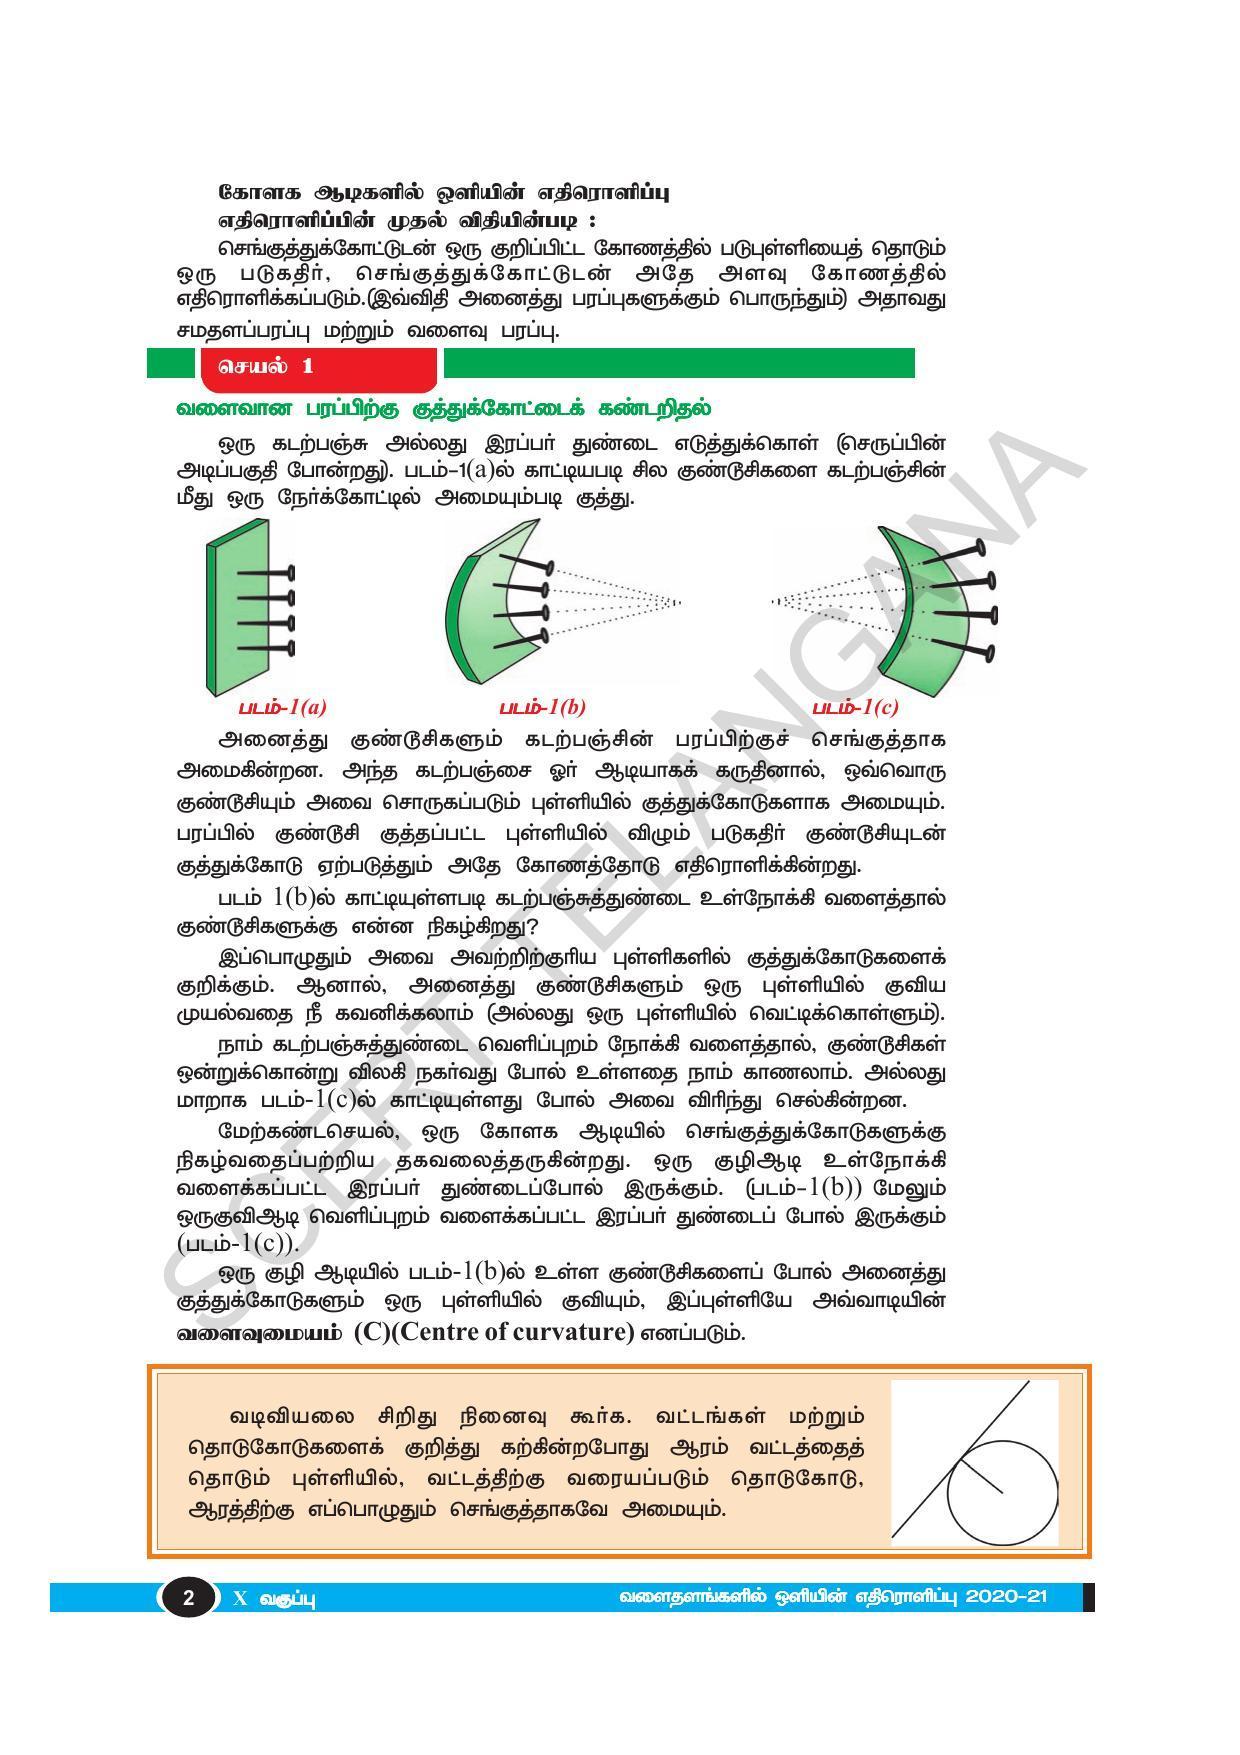 TS SCERT Class 10 Physical Science(Tamil Medium) Text Book - Page 14